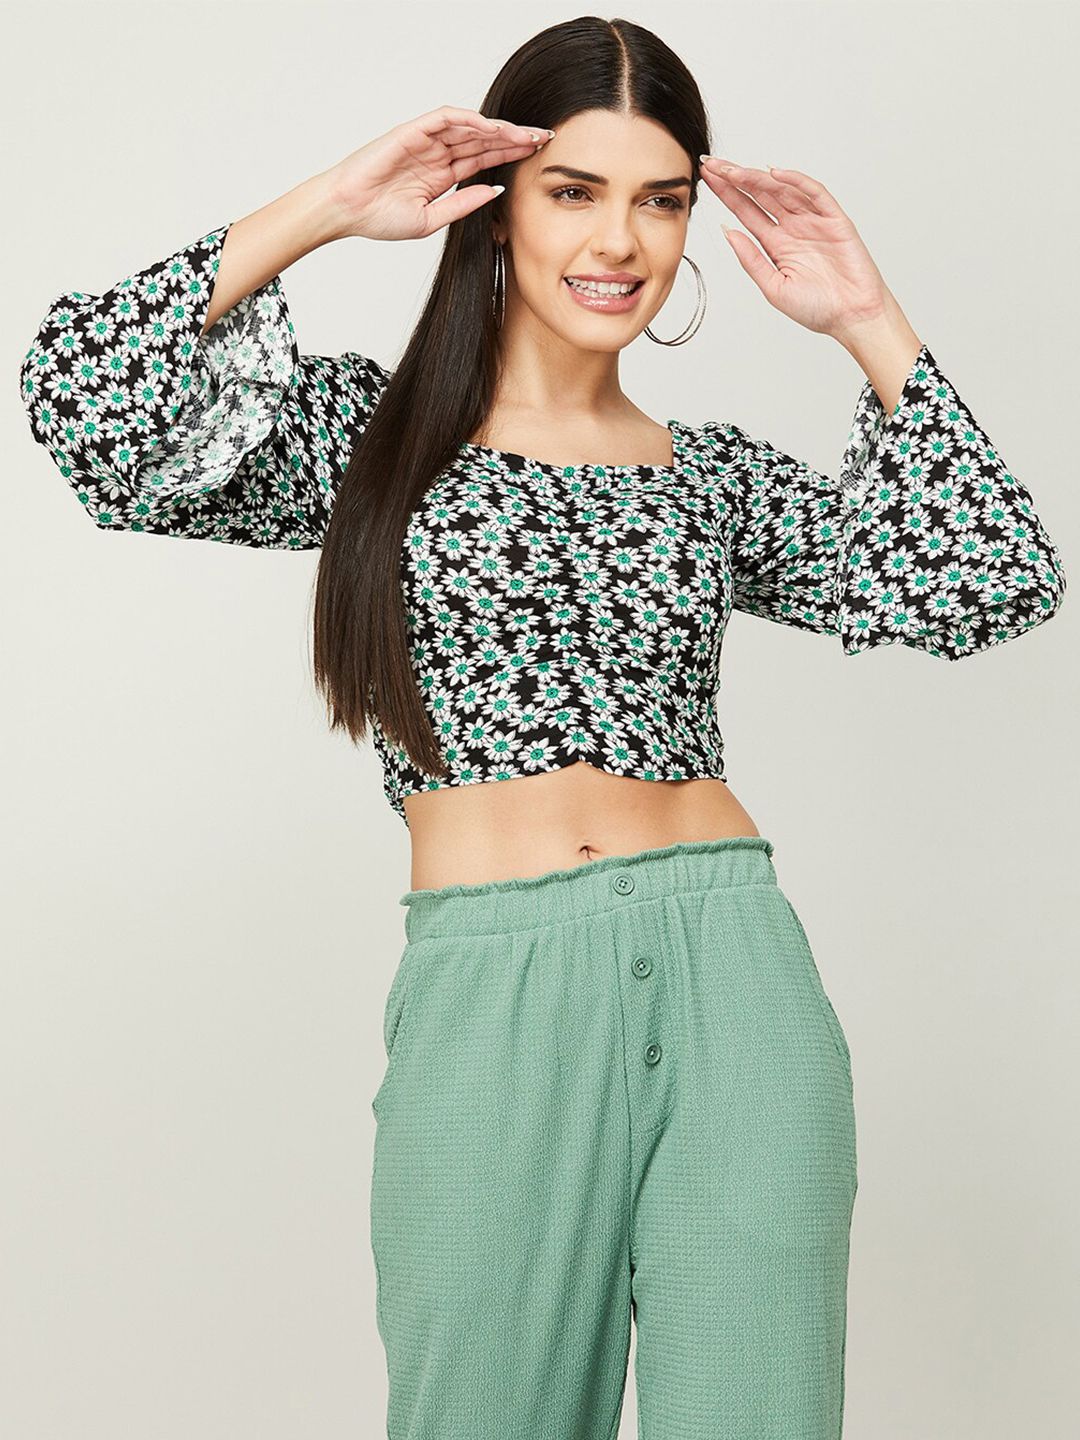 Ginger by Lifestyle Floral Print Crop Top Price in India